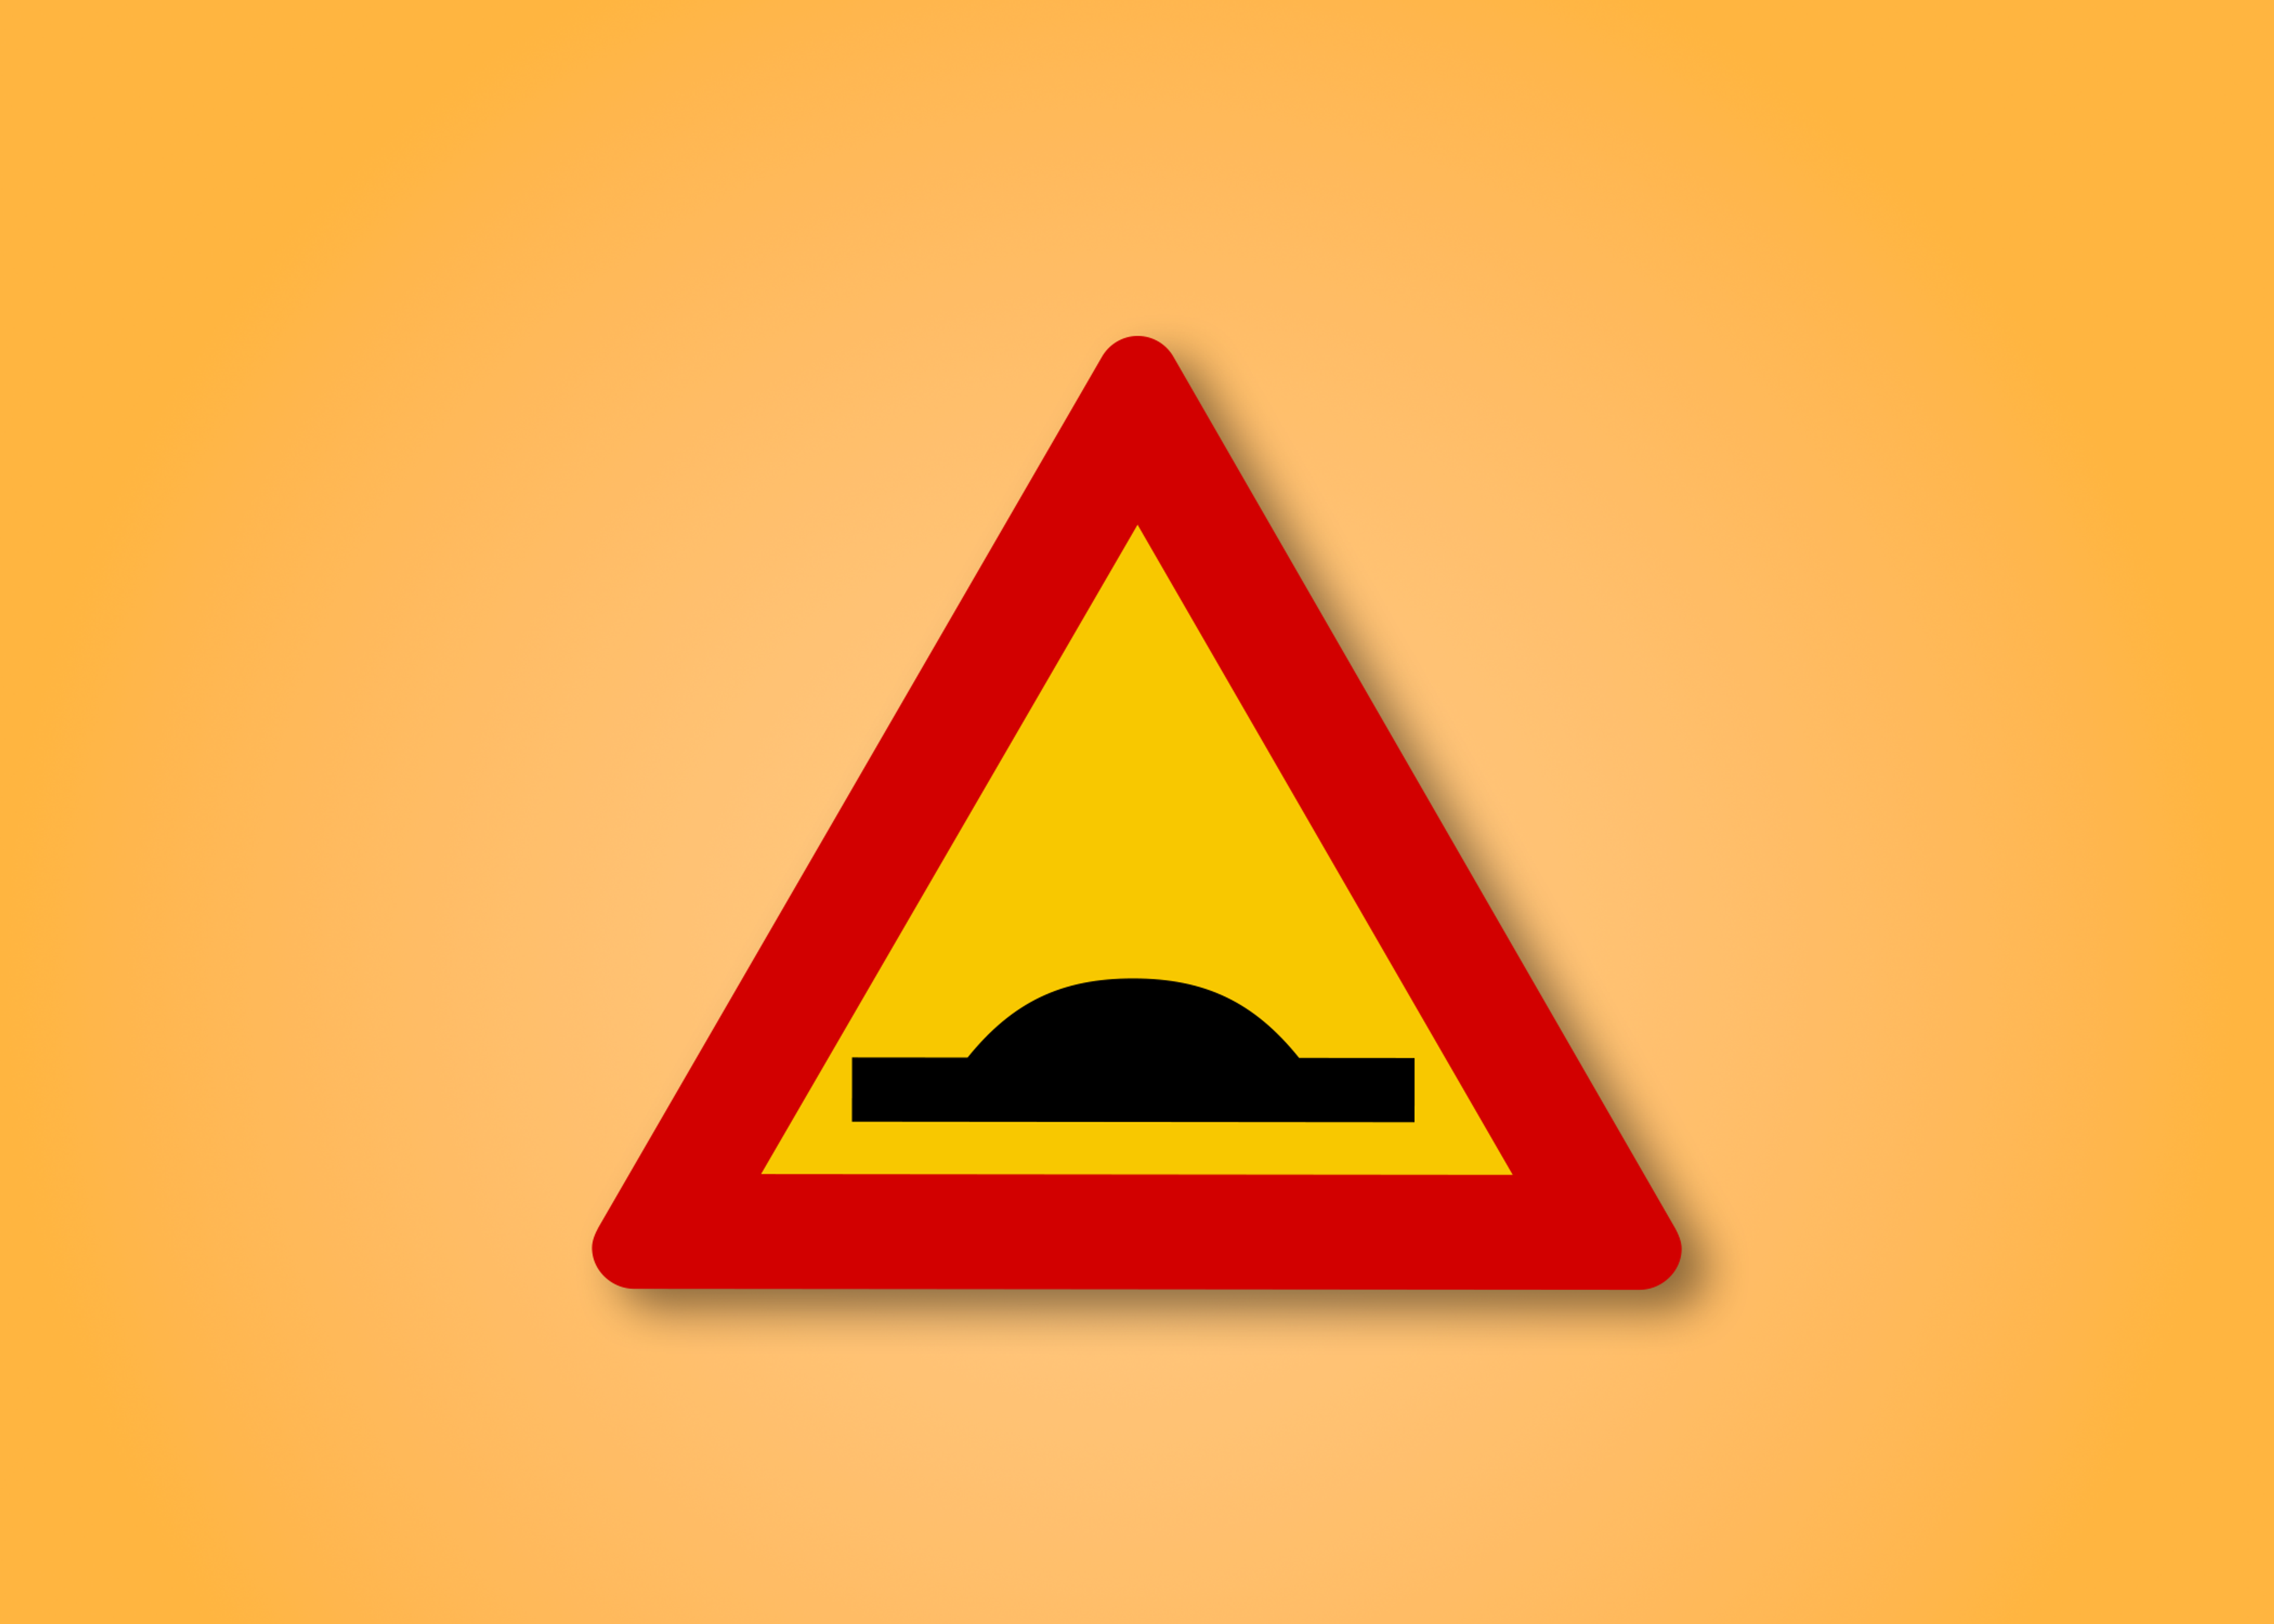 Red and yellow triangle road sign with a bump in the middle. This road sign means Speed Bump ahead